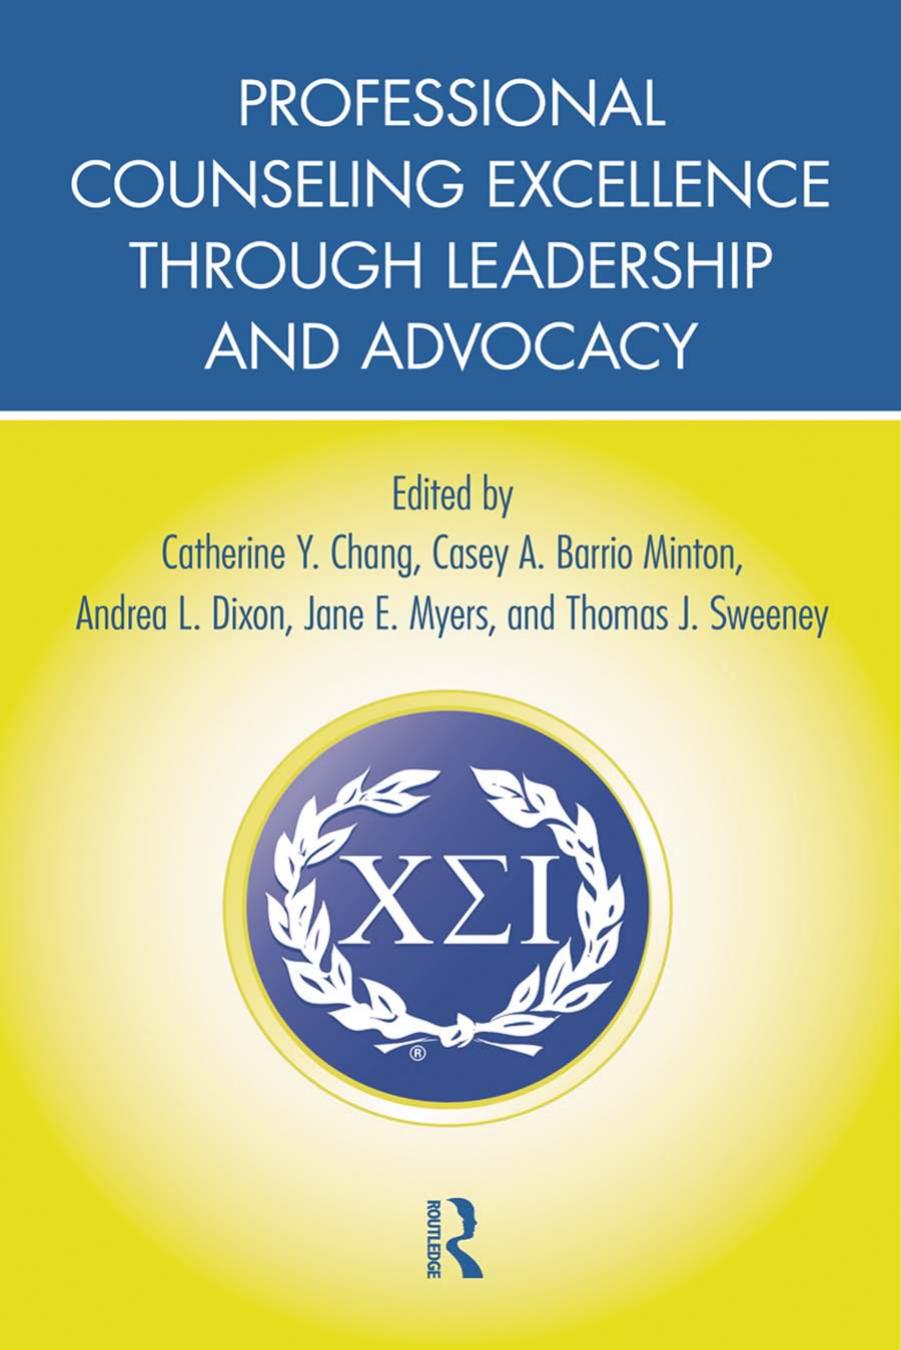 PProfessional Counseling Excellence through Leadership and Advocacy 1st Edition by Catherine Chang; Andrea Dixon;